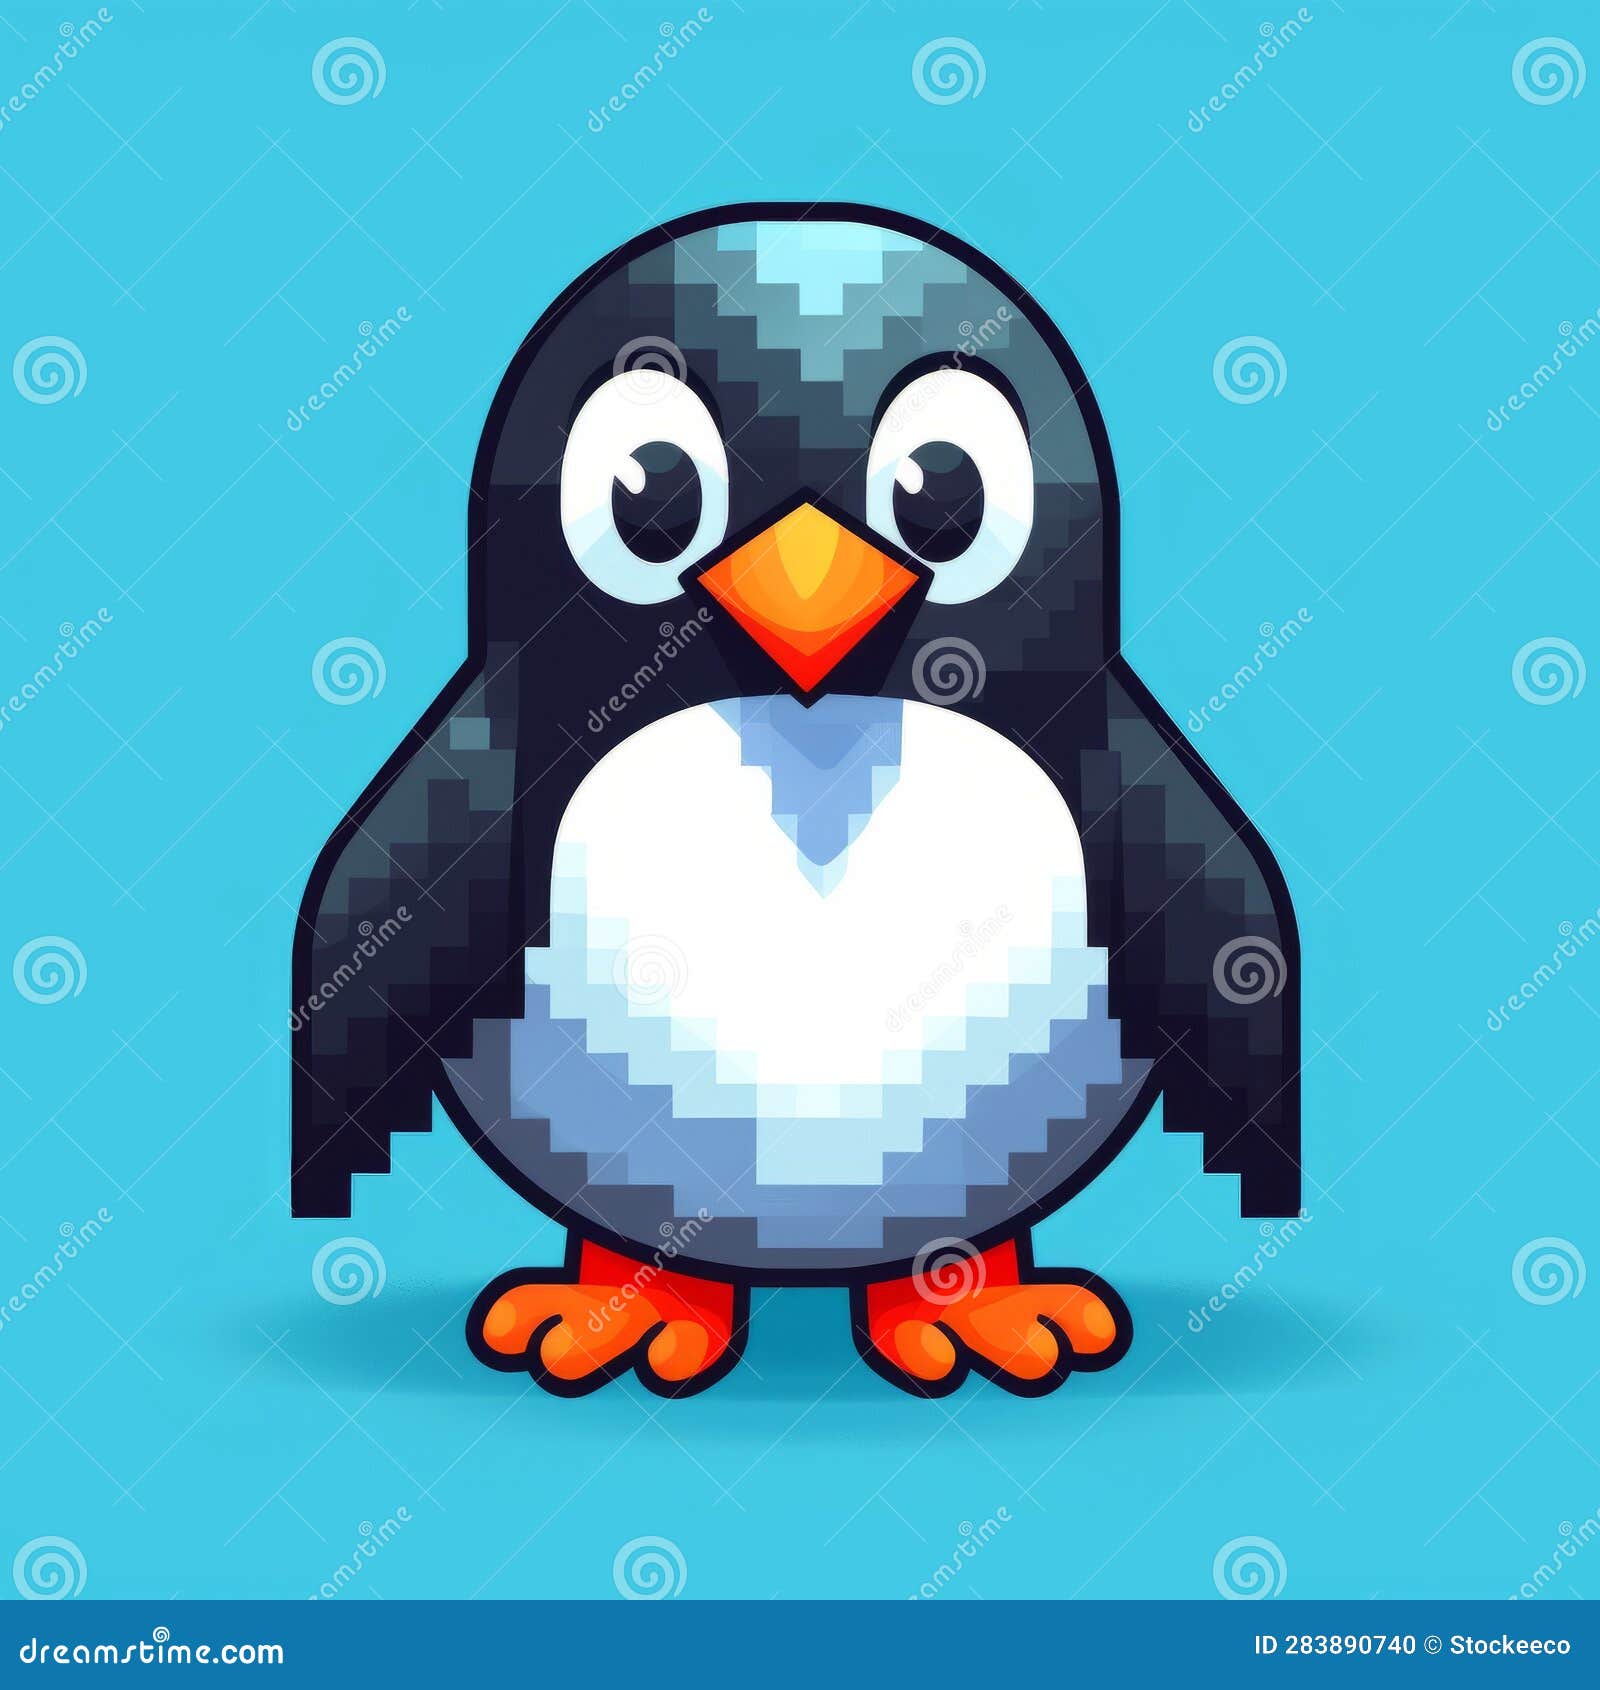 Pixel Penguin: Detailed Character Design with Minecraft-inspired Pixel ...